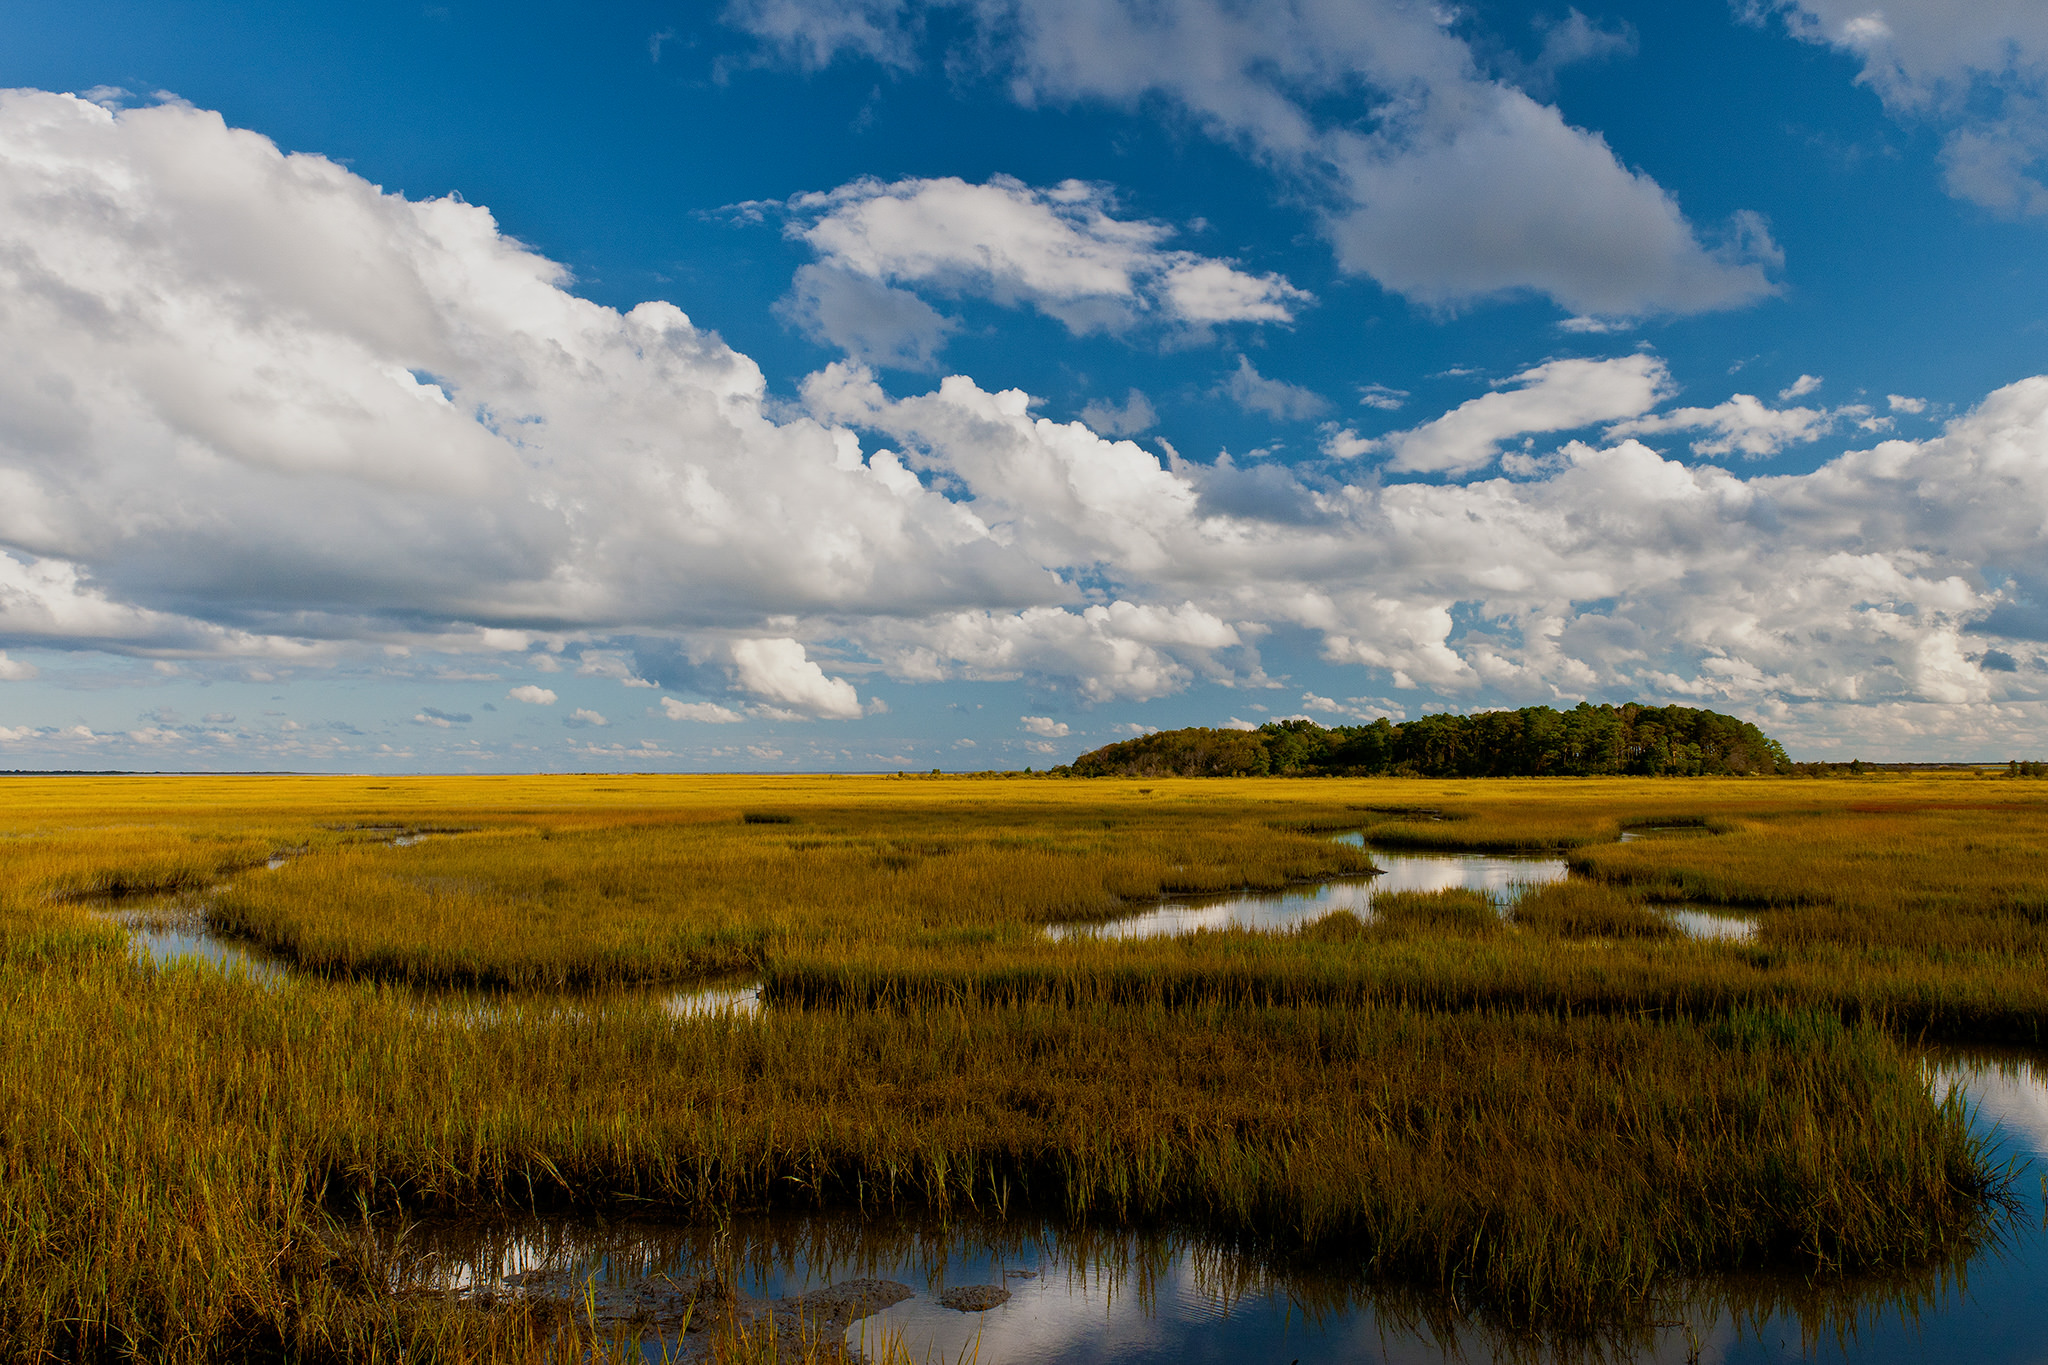 White clouds float in a blue sky above a wetland on Virginia's Eastern Shore. Water winds in narrow paths through the grass.